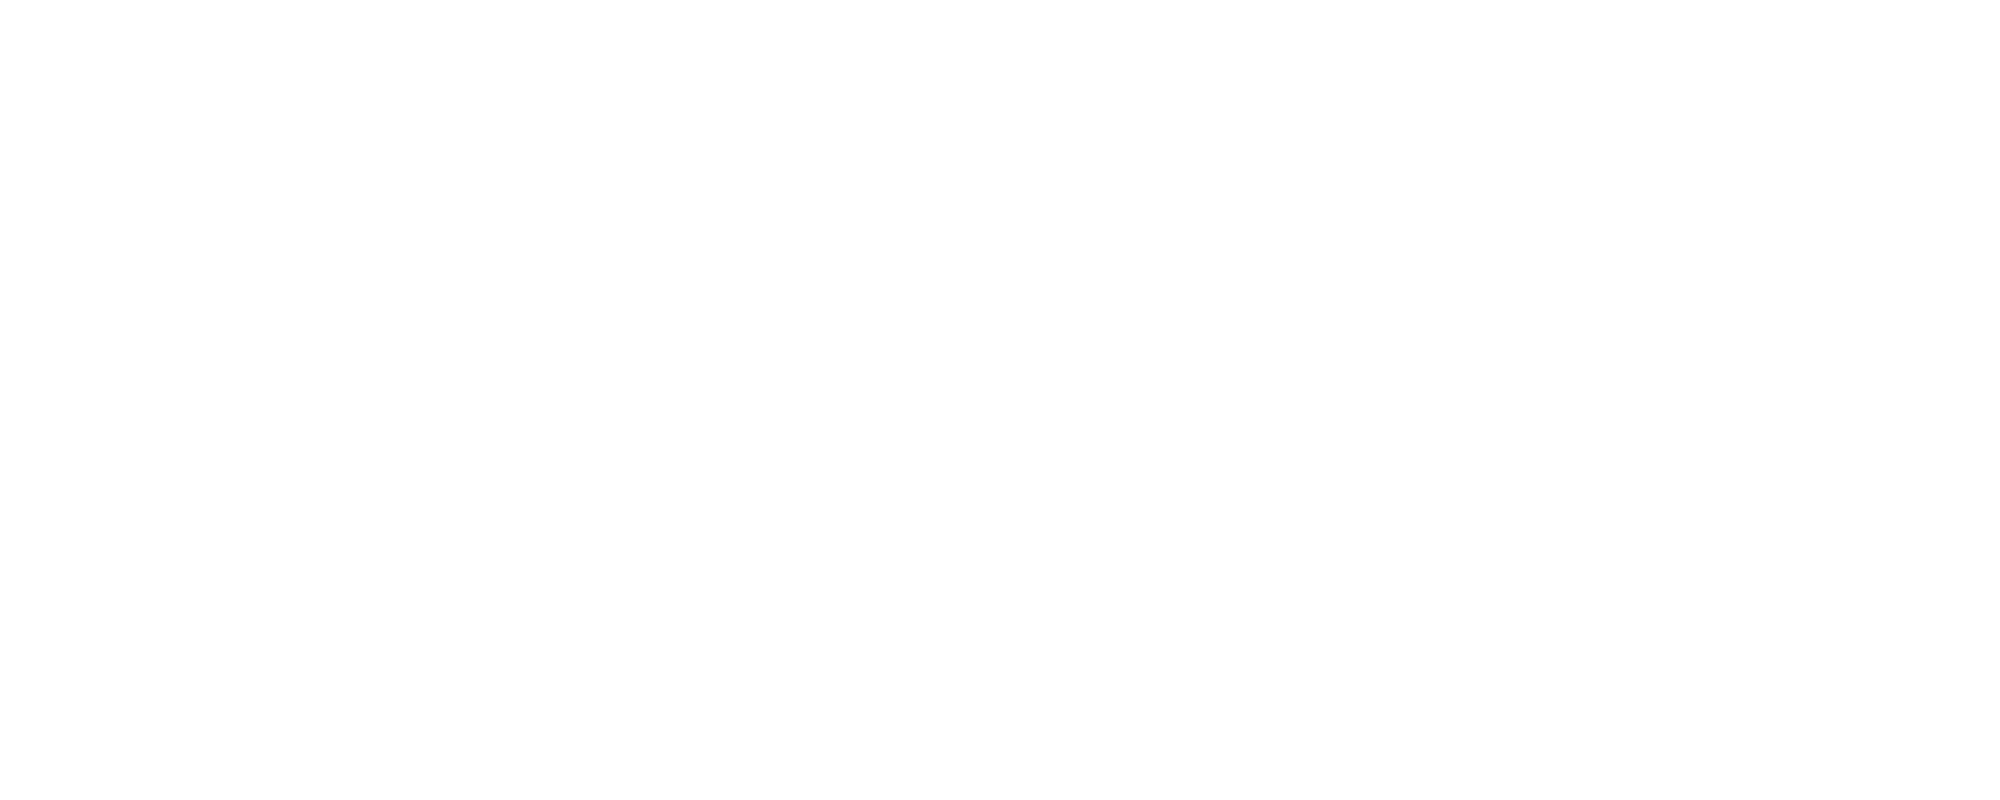 REDONDO BALLET COMPANY BECOMES 150TH MEMBER OF OVATION TV’S STAND FOR THE ARTS COALITION